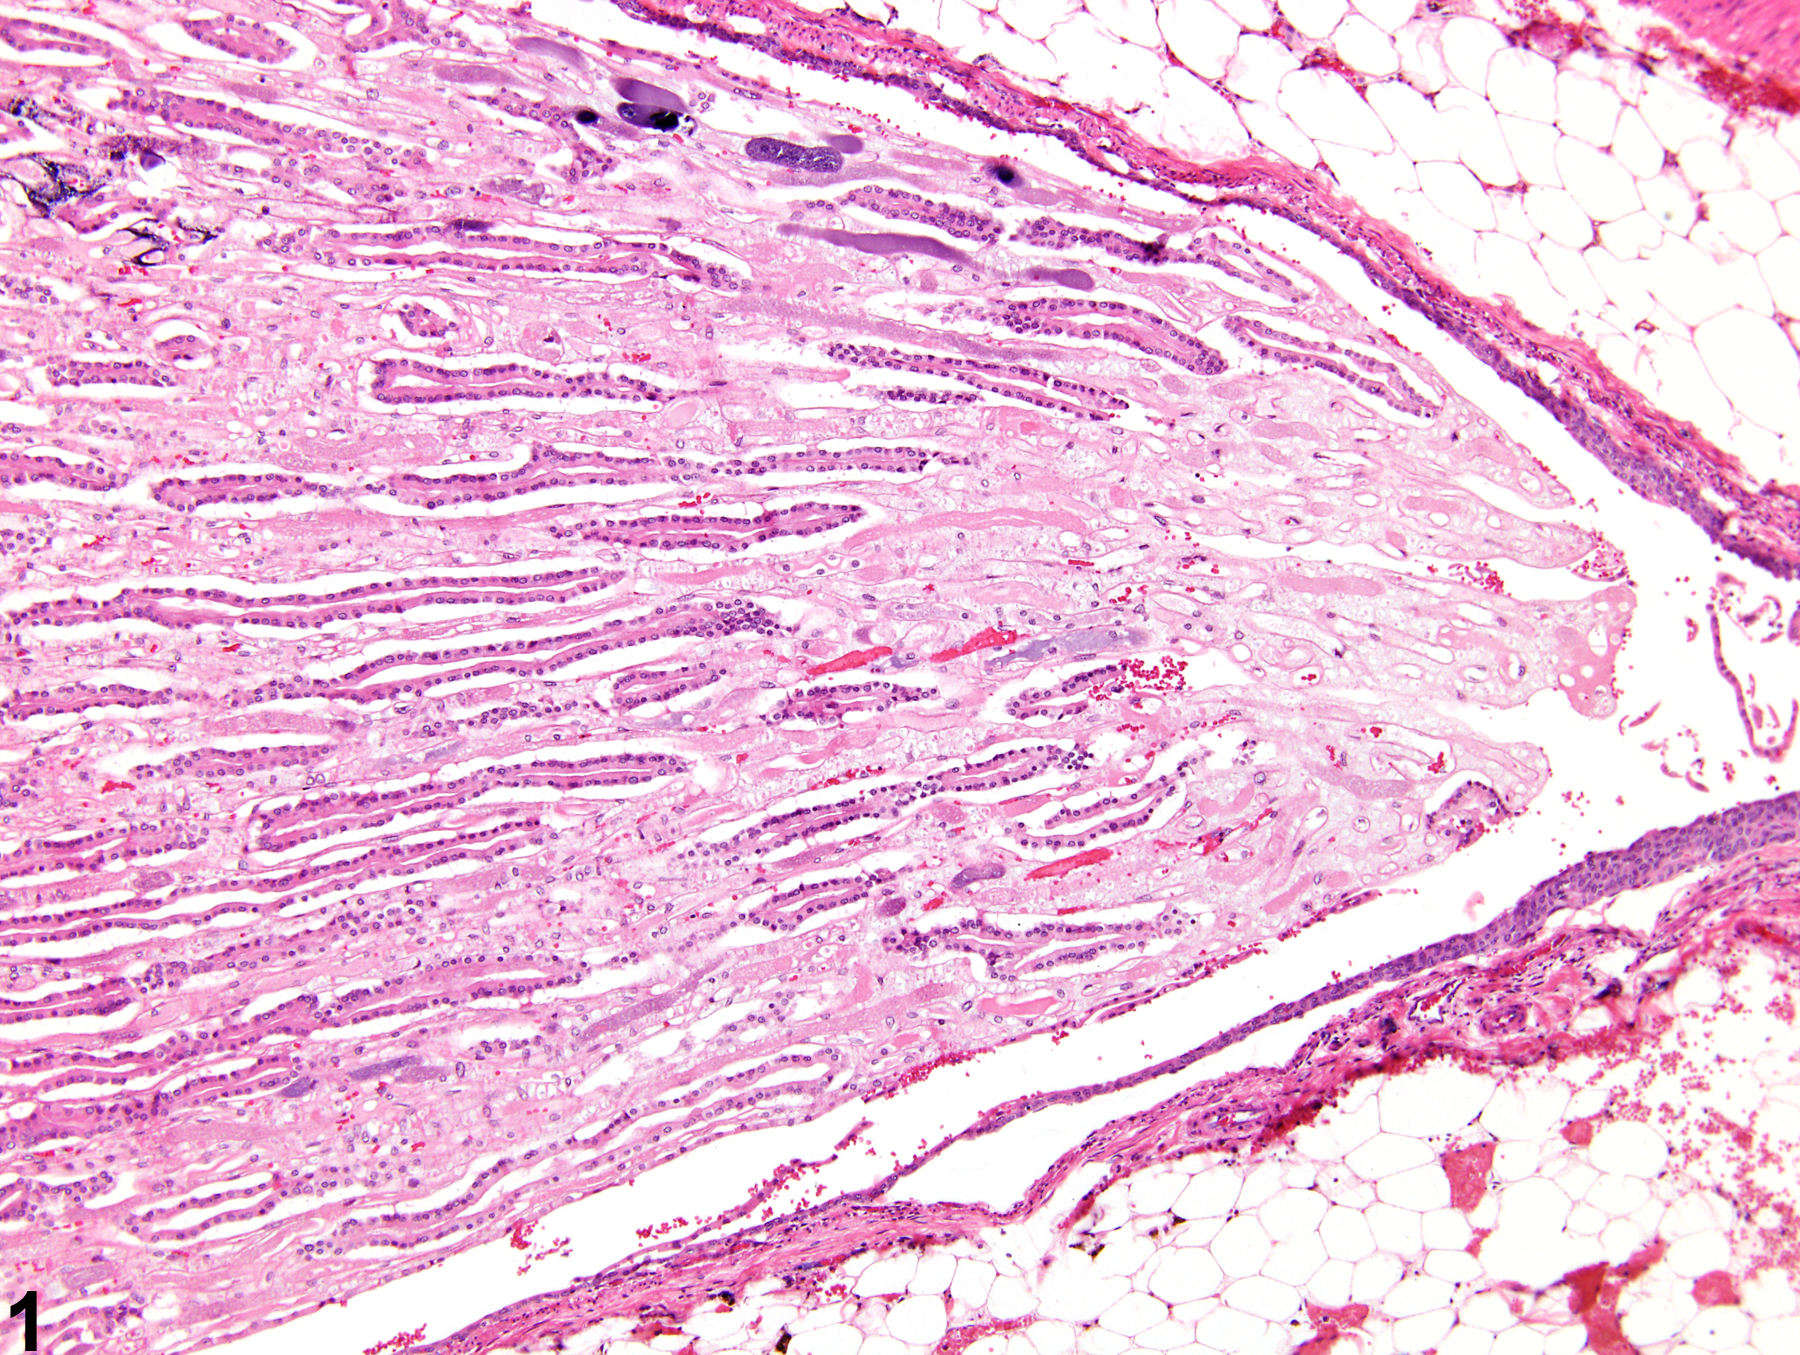 Image of papilla necrosis in the kidney from a male F344/N rat in a chronic study